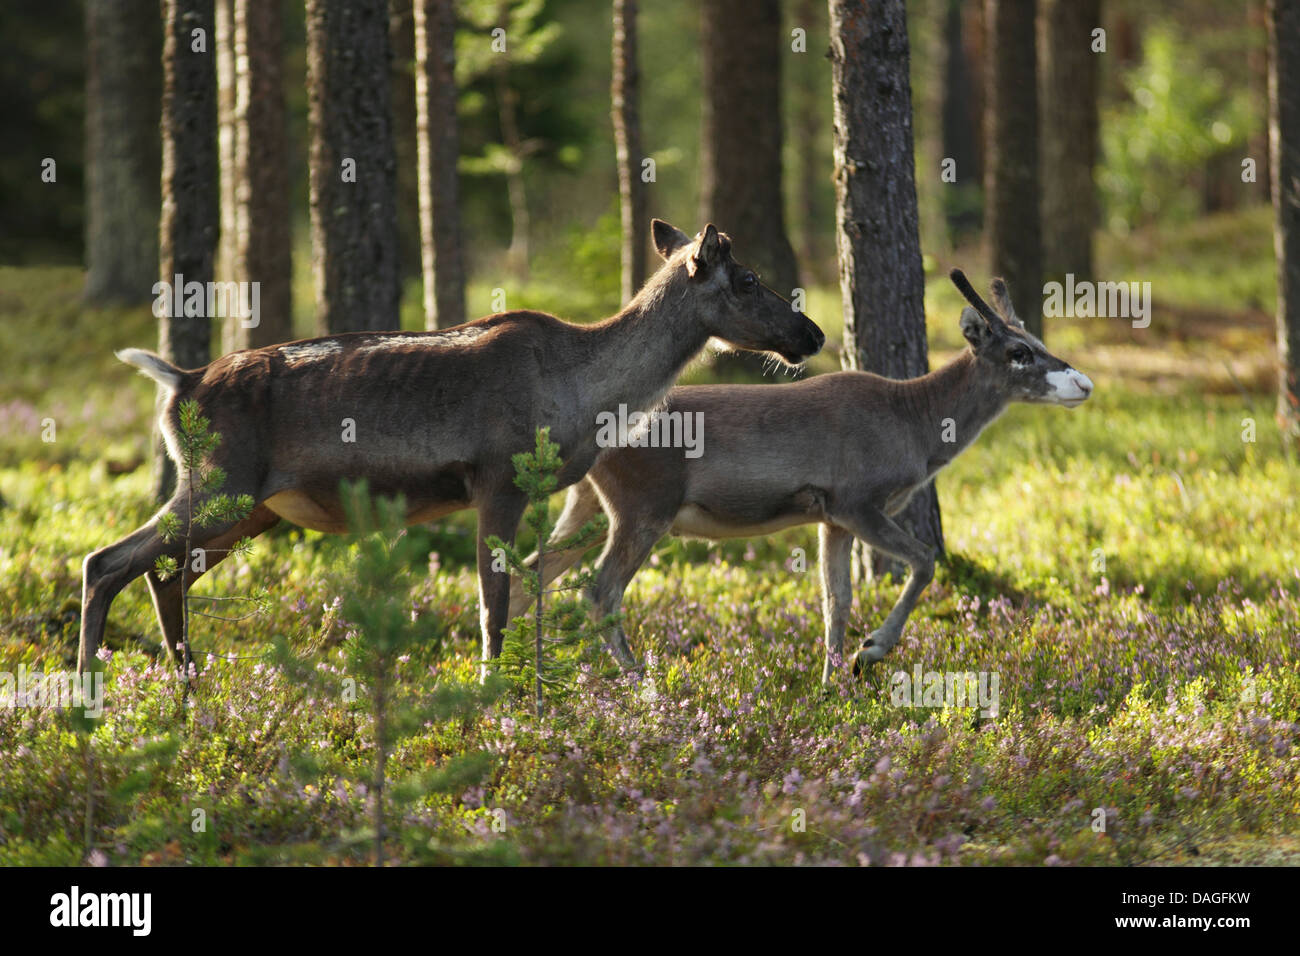 Adult hind and young reindeer (Rangifer tarandus) running among vegetation at the edge of a forest Stock Photo